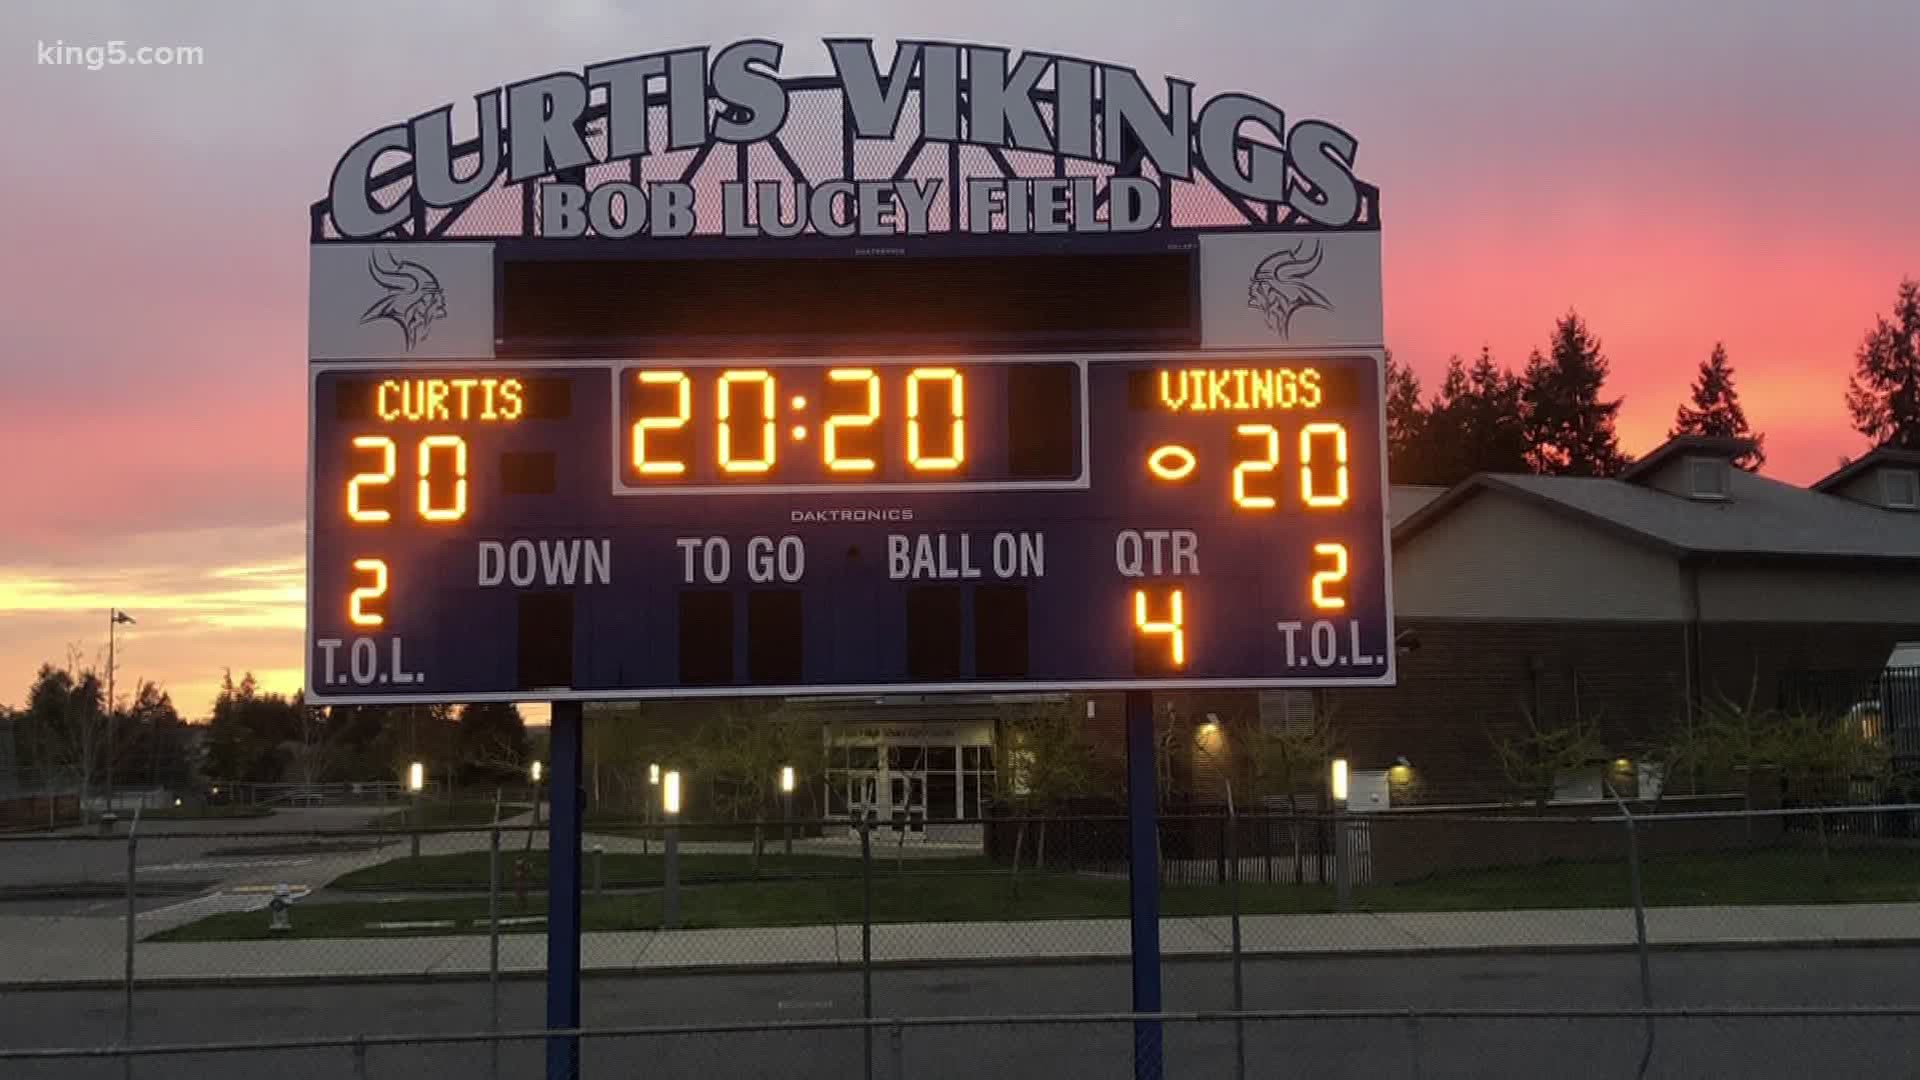 Several high school football stadiums across Washington state turned on their lights for 20 minutes to honor the 2020 senior athletes who lost their season.